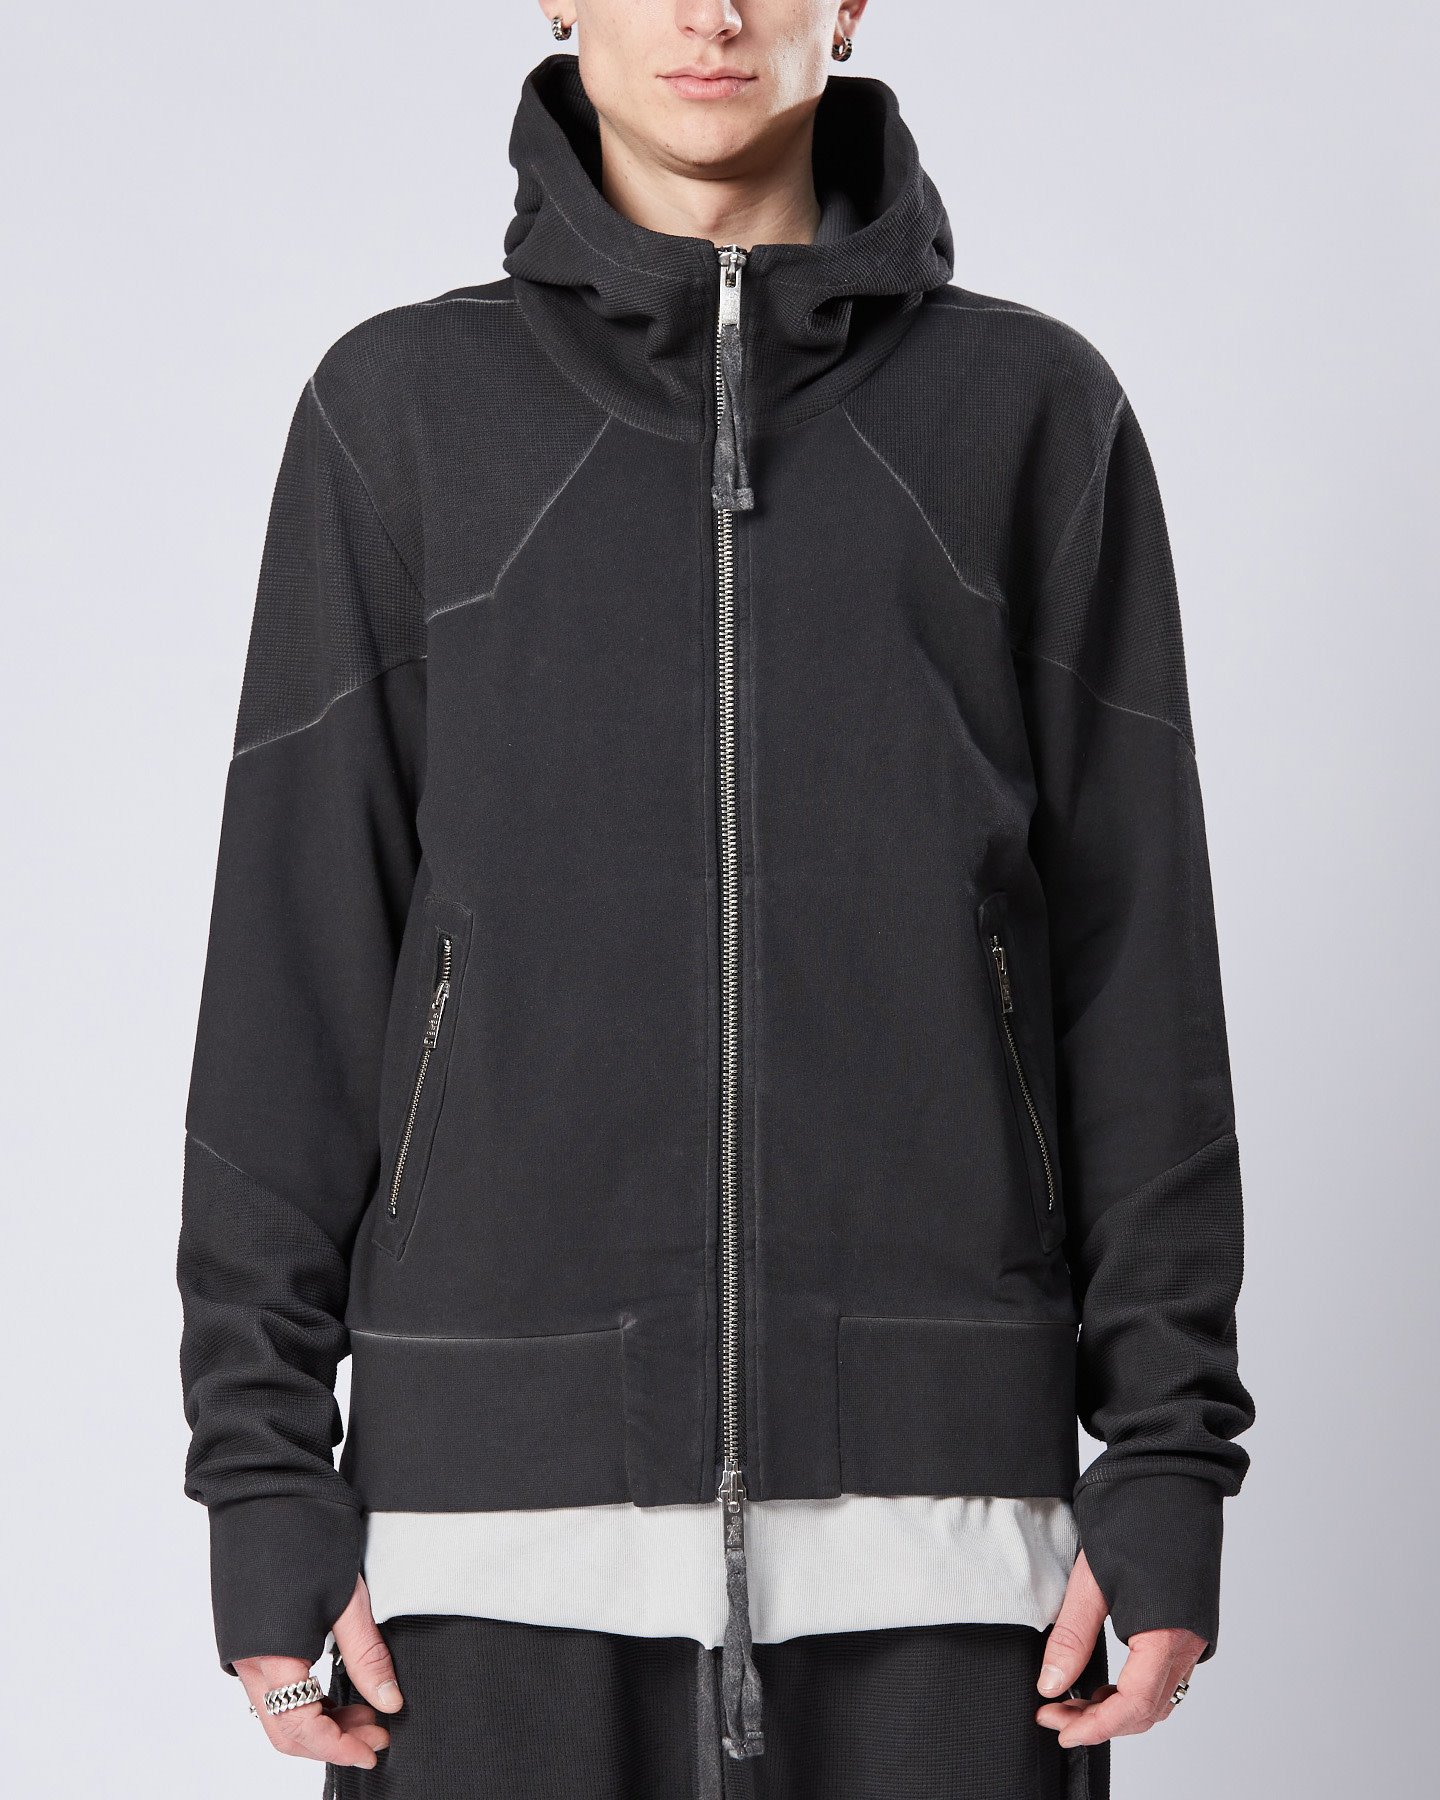 STRETCH COTTON & WAFFLE KNIT ZIP UP HOODIE - OIL